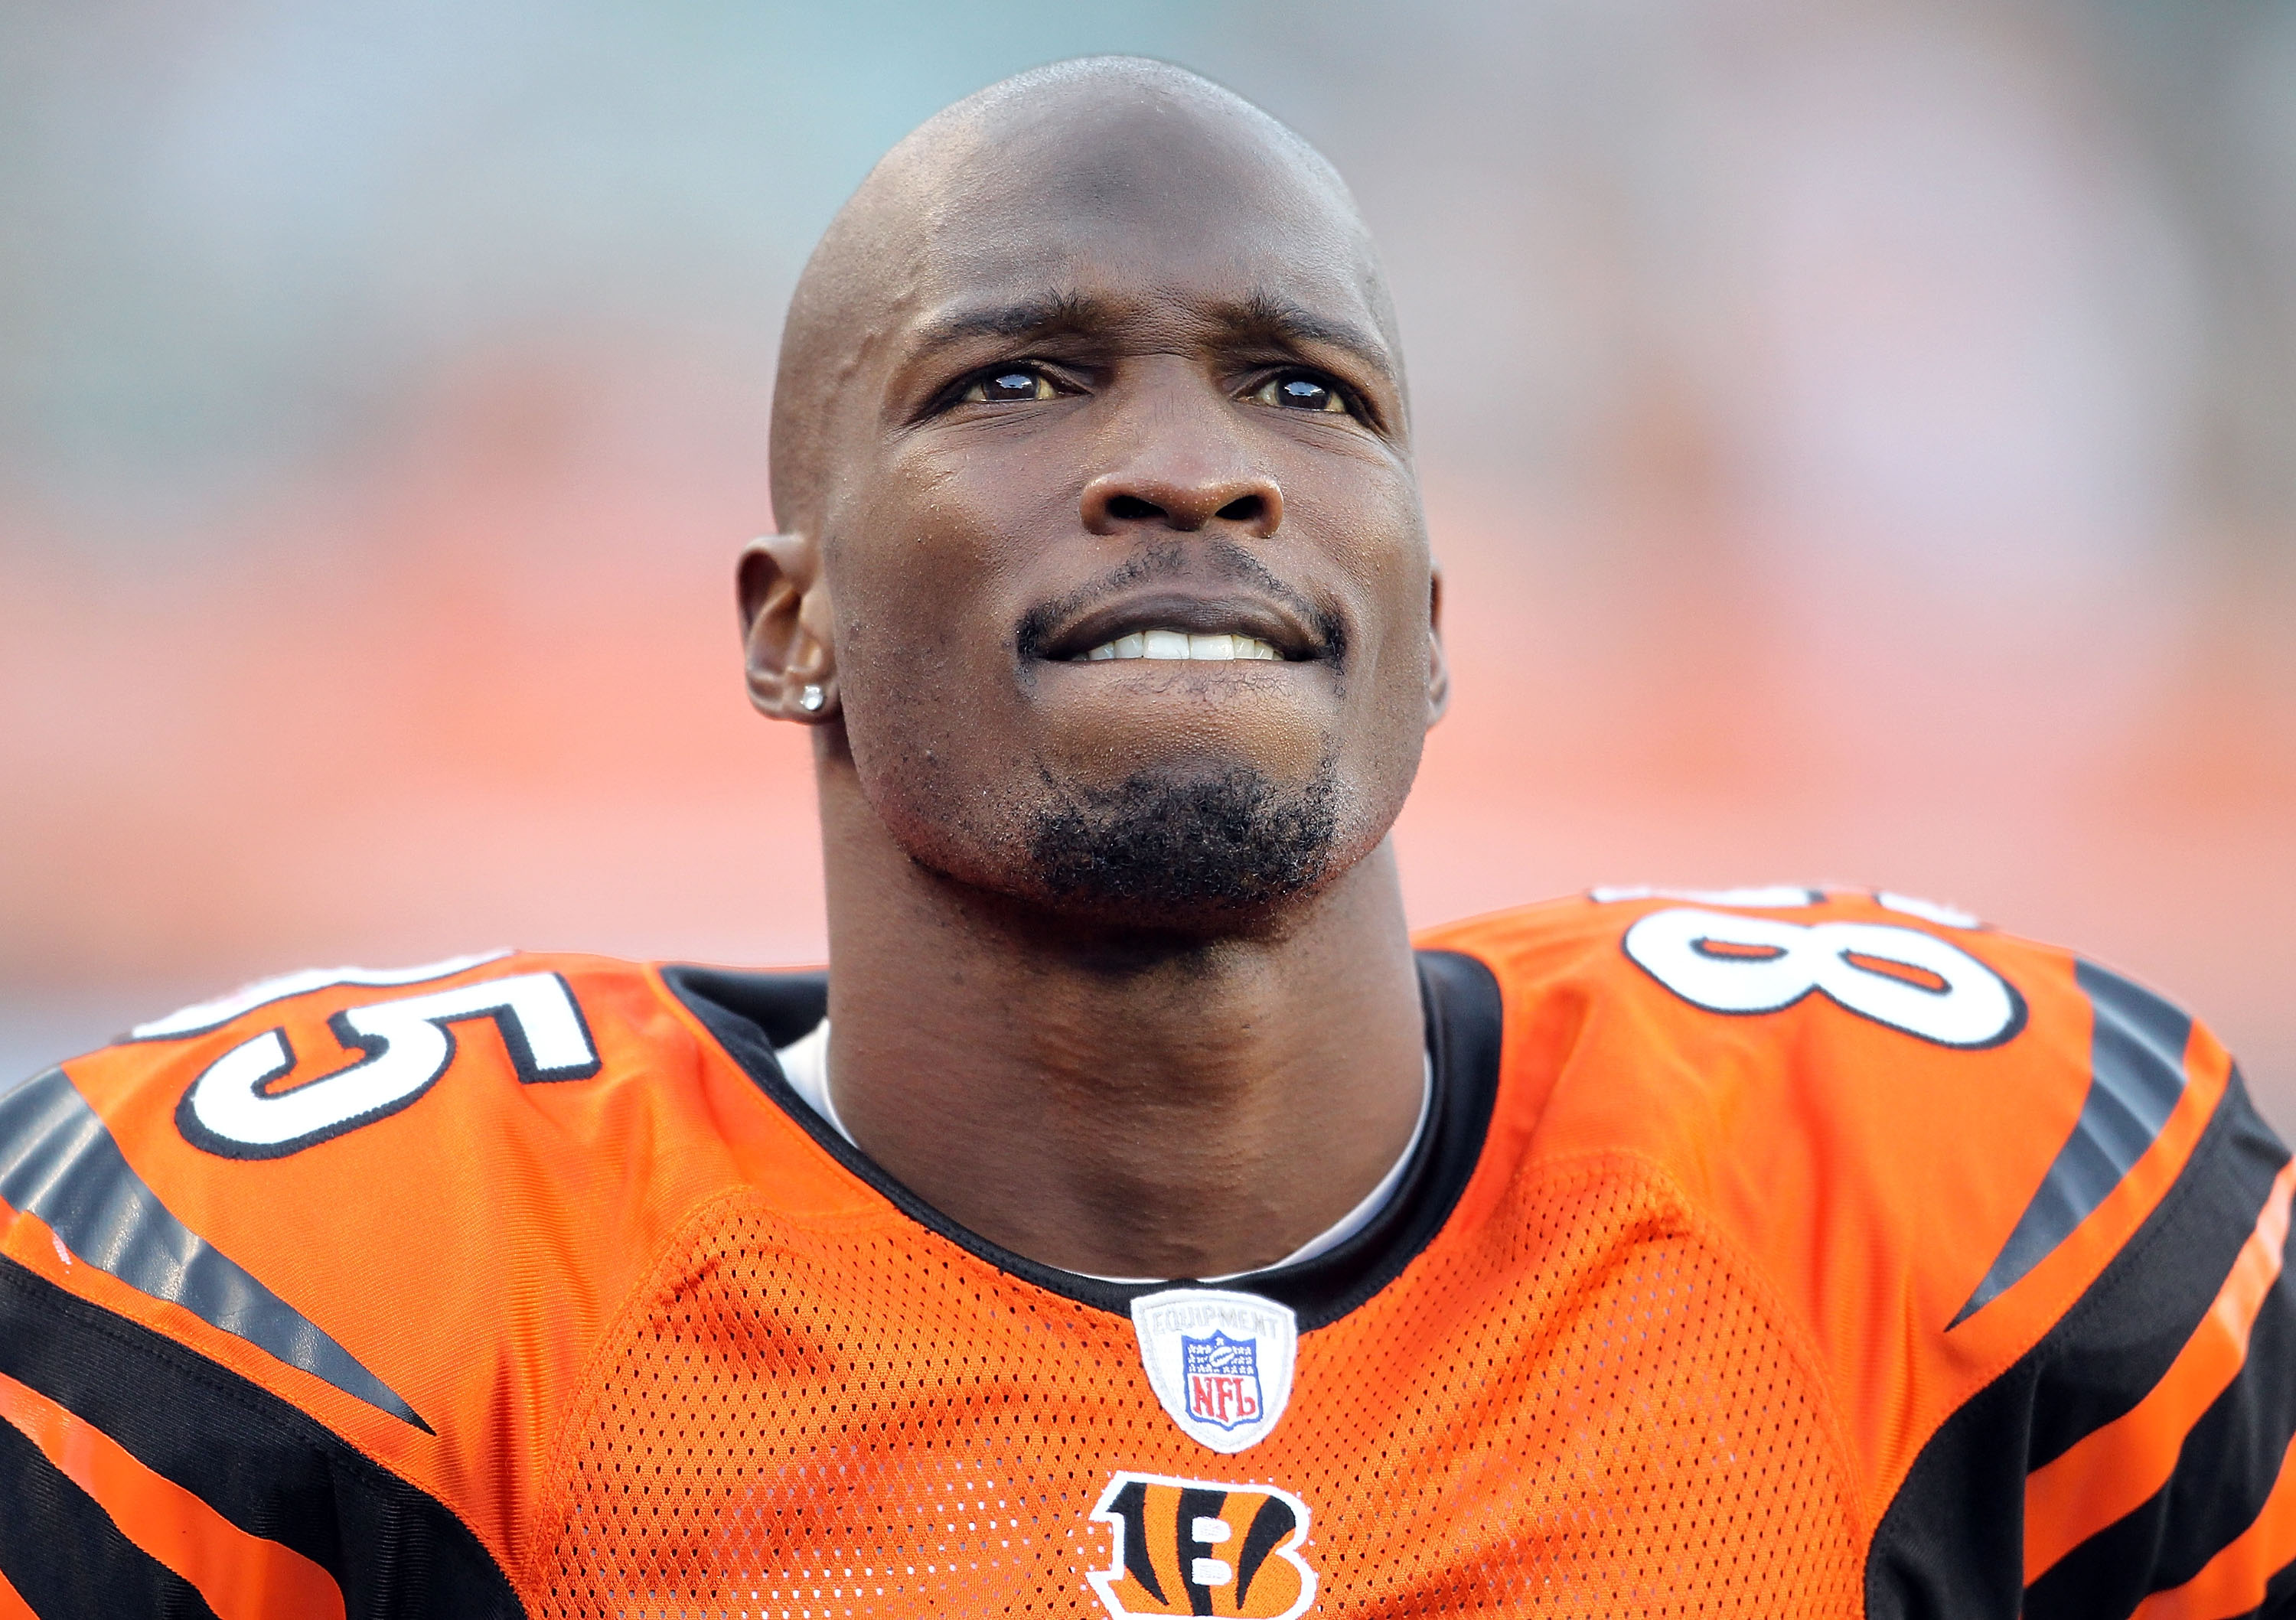 CINCINNATI - NOVEMBER 21:  Chad Ochocinco #85 of the Cincinnati Bengals watches the final minute of the Bengals 49-31 loss to the Buffalo Bills at Paul Brown Stadium on November 21, 2010 in Cincinnati, Ohio.  (Photo by Andy Lyons/Getty Images)